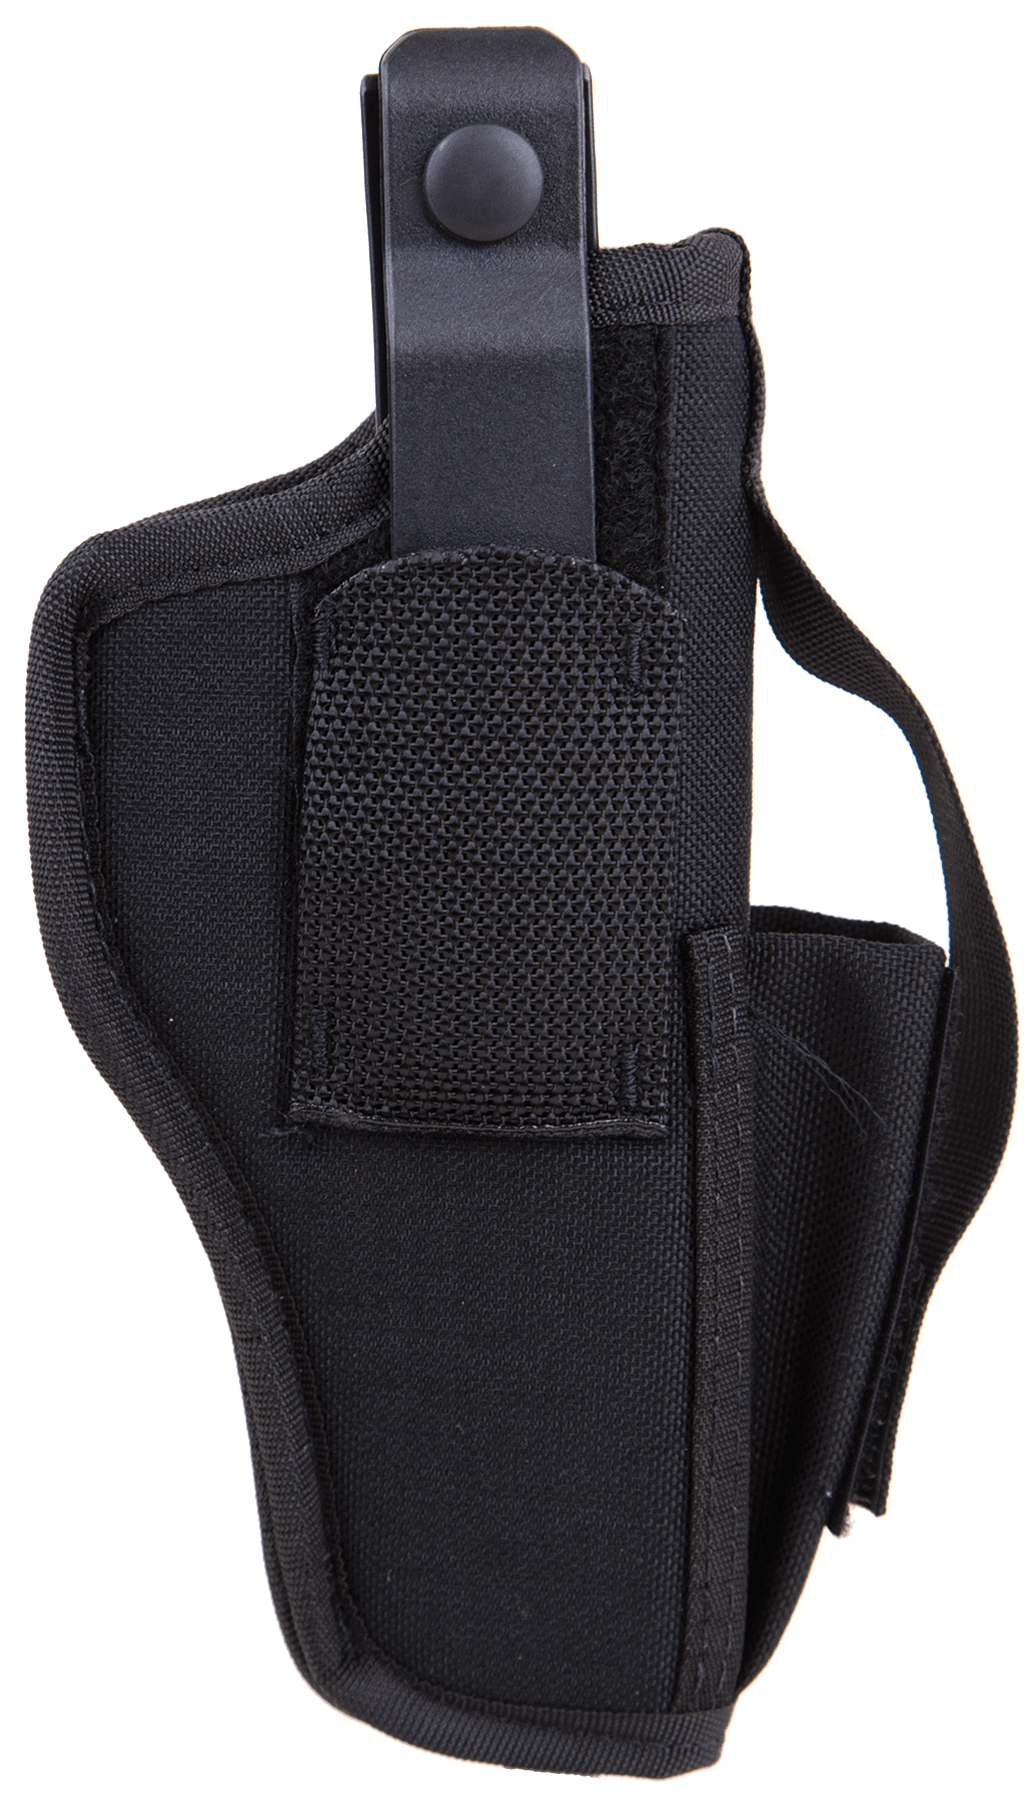 Blackhawk Blackhawk Ambidextrous Holster - W/mag Pouch #03 Large Autos Holsters And Related Items